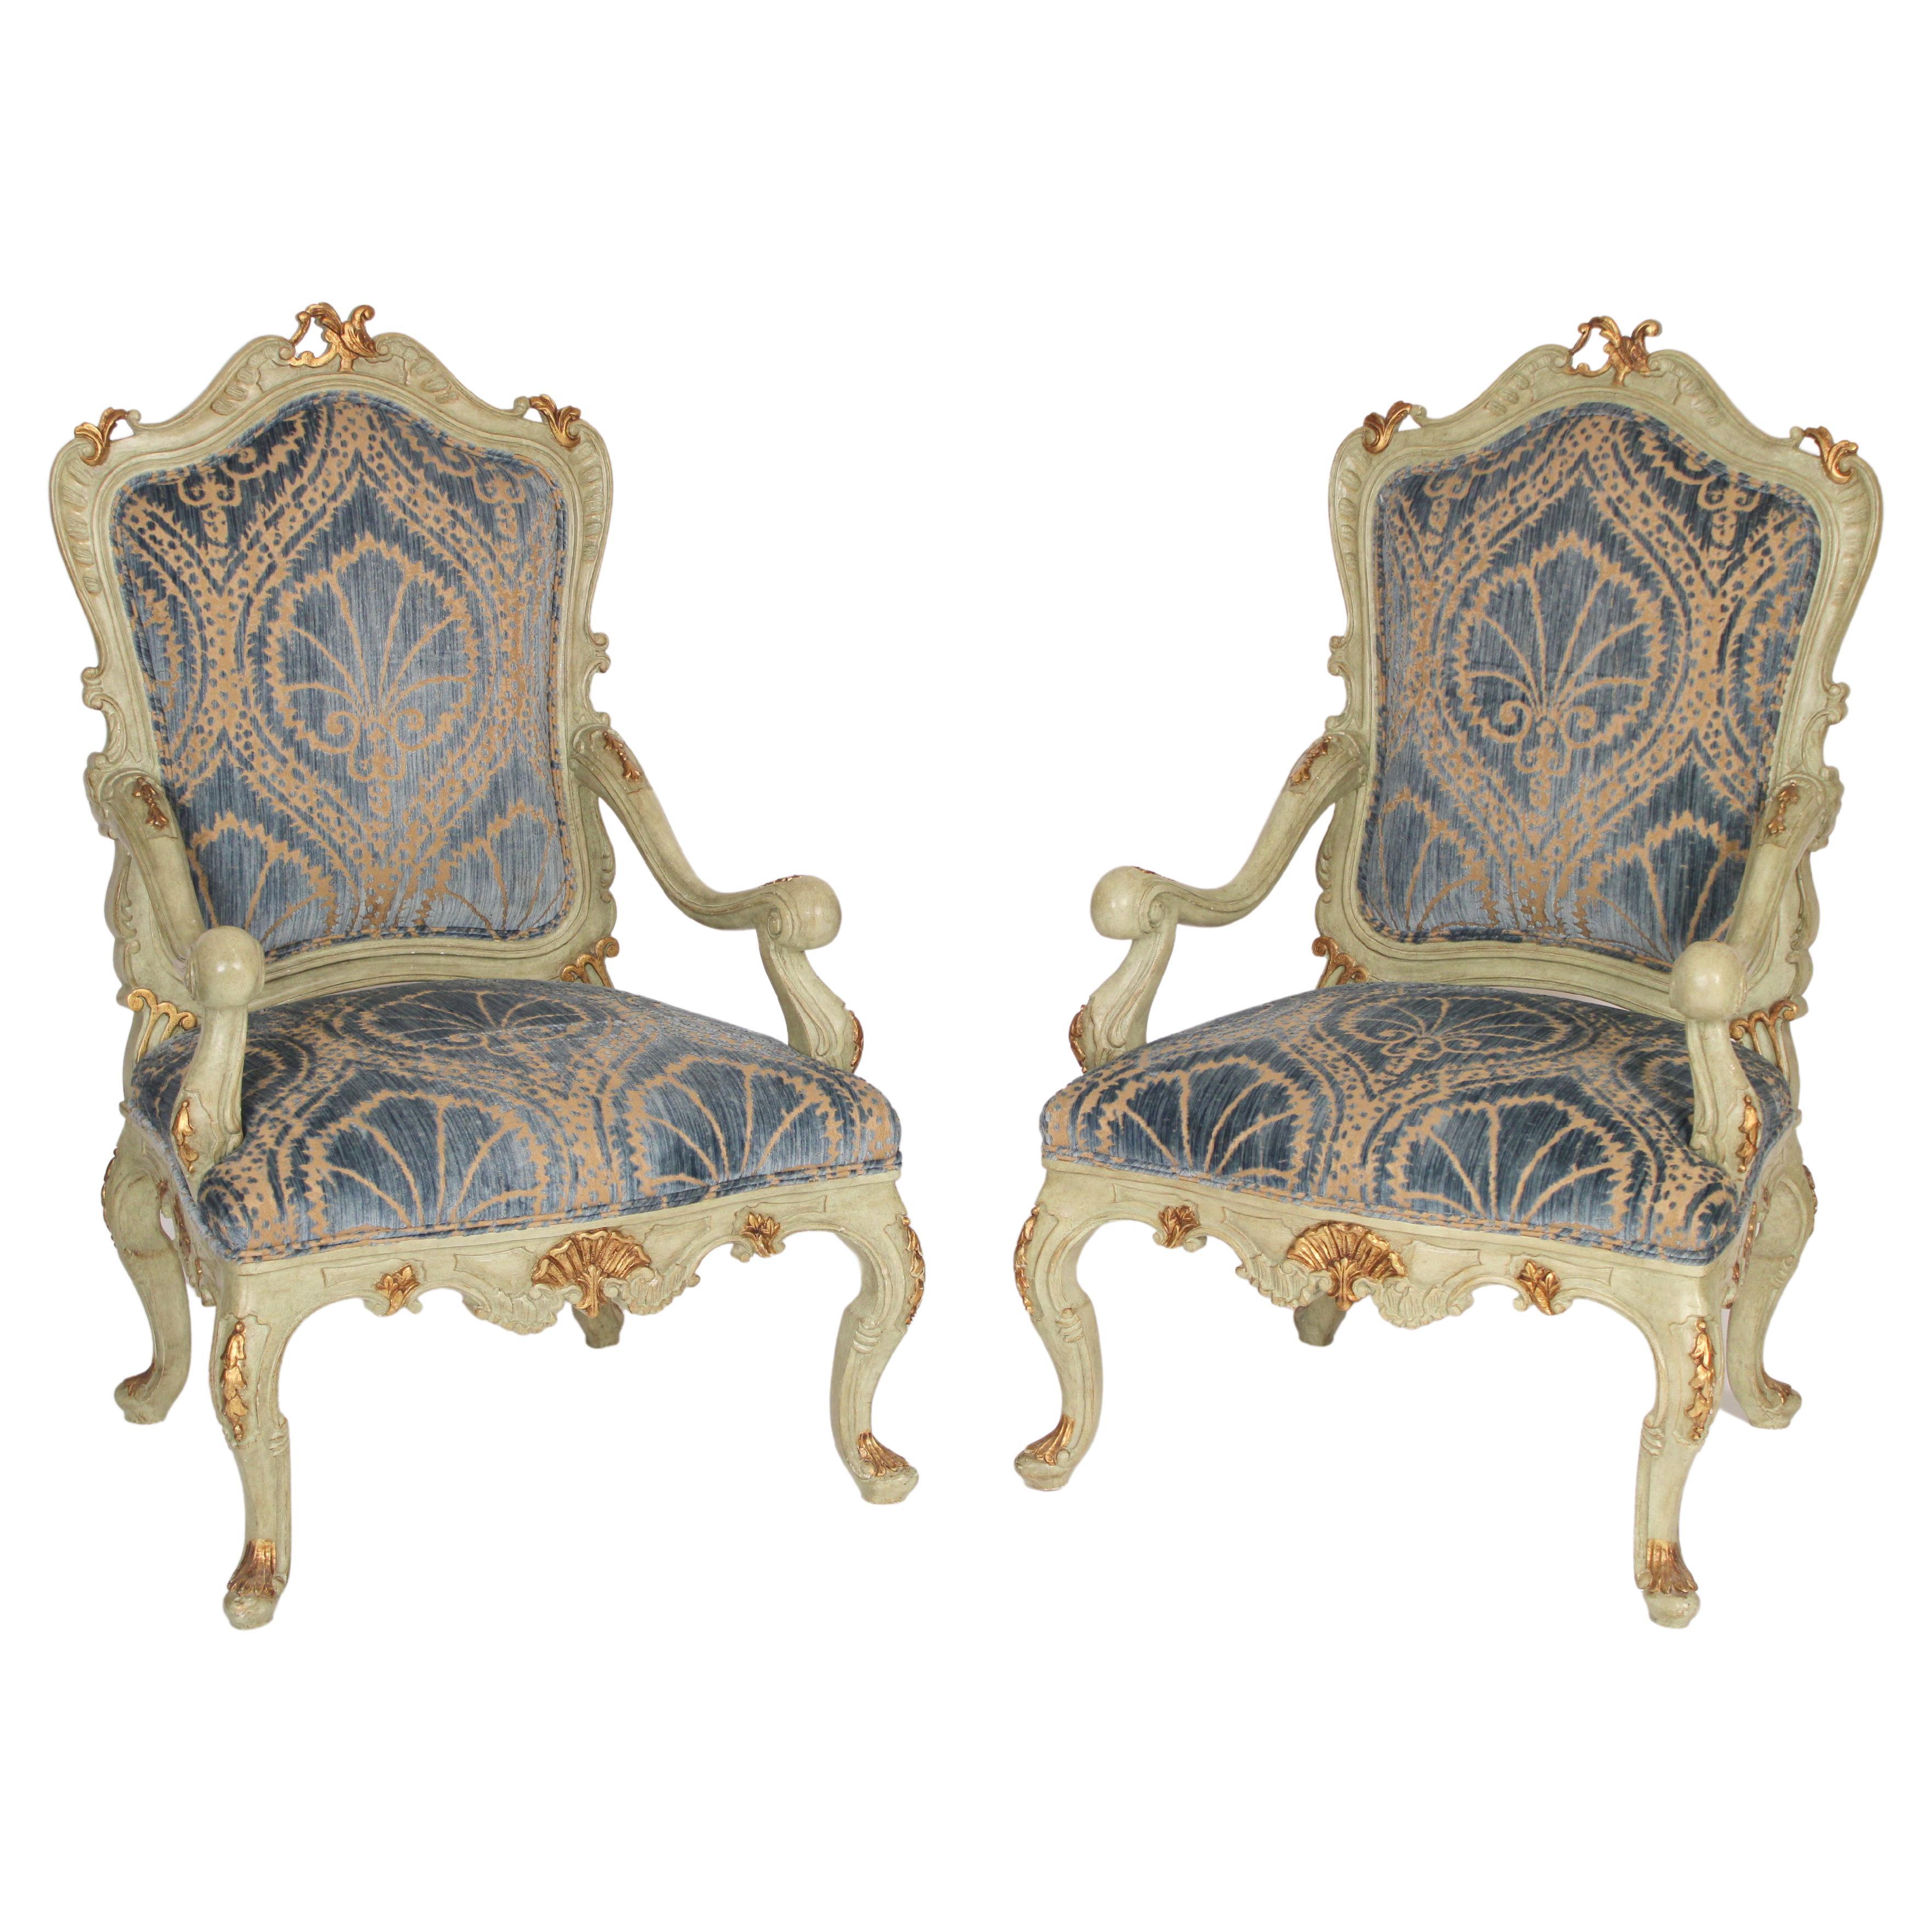 Pair of Venetian Louis XV Style Painted and Gilt Decorated Armchairs